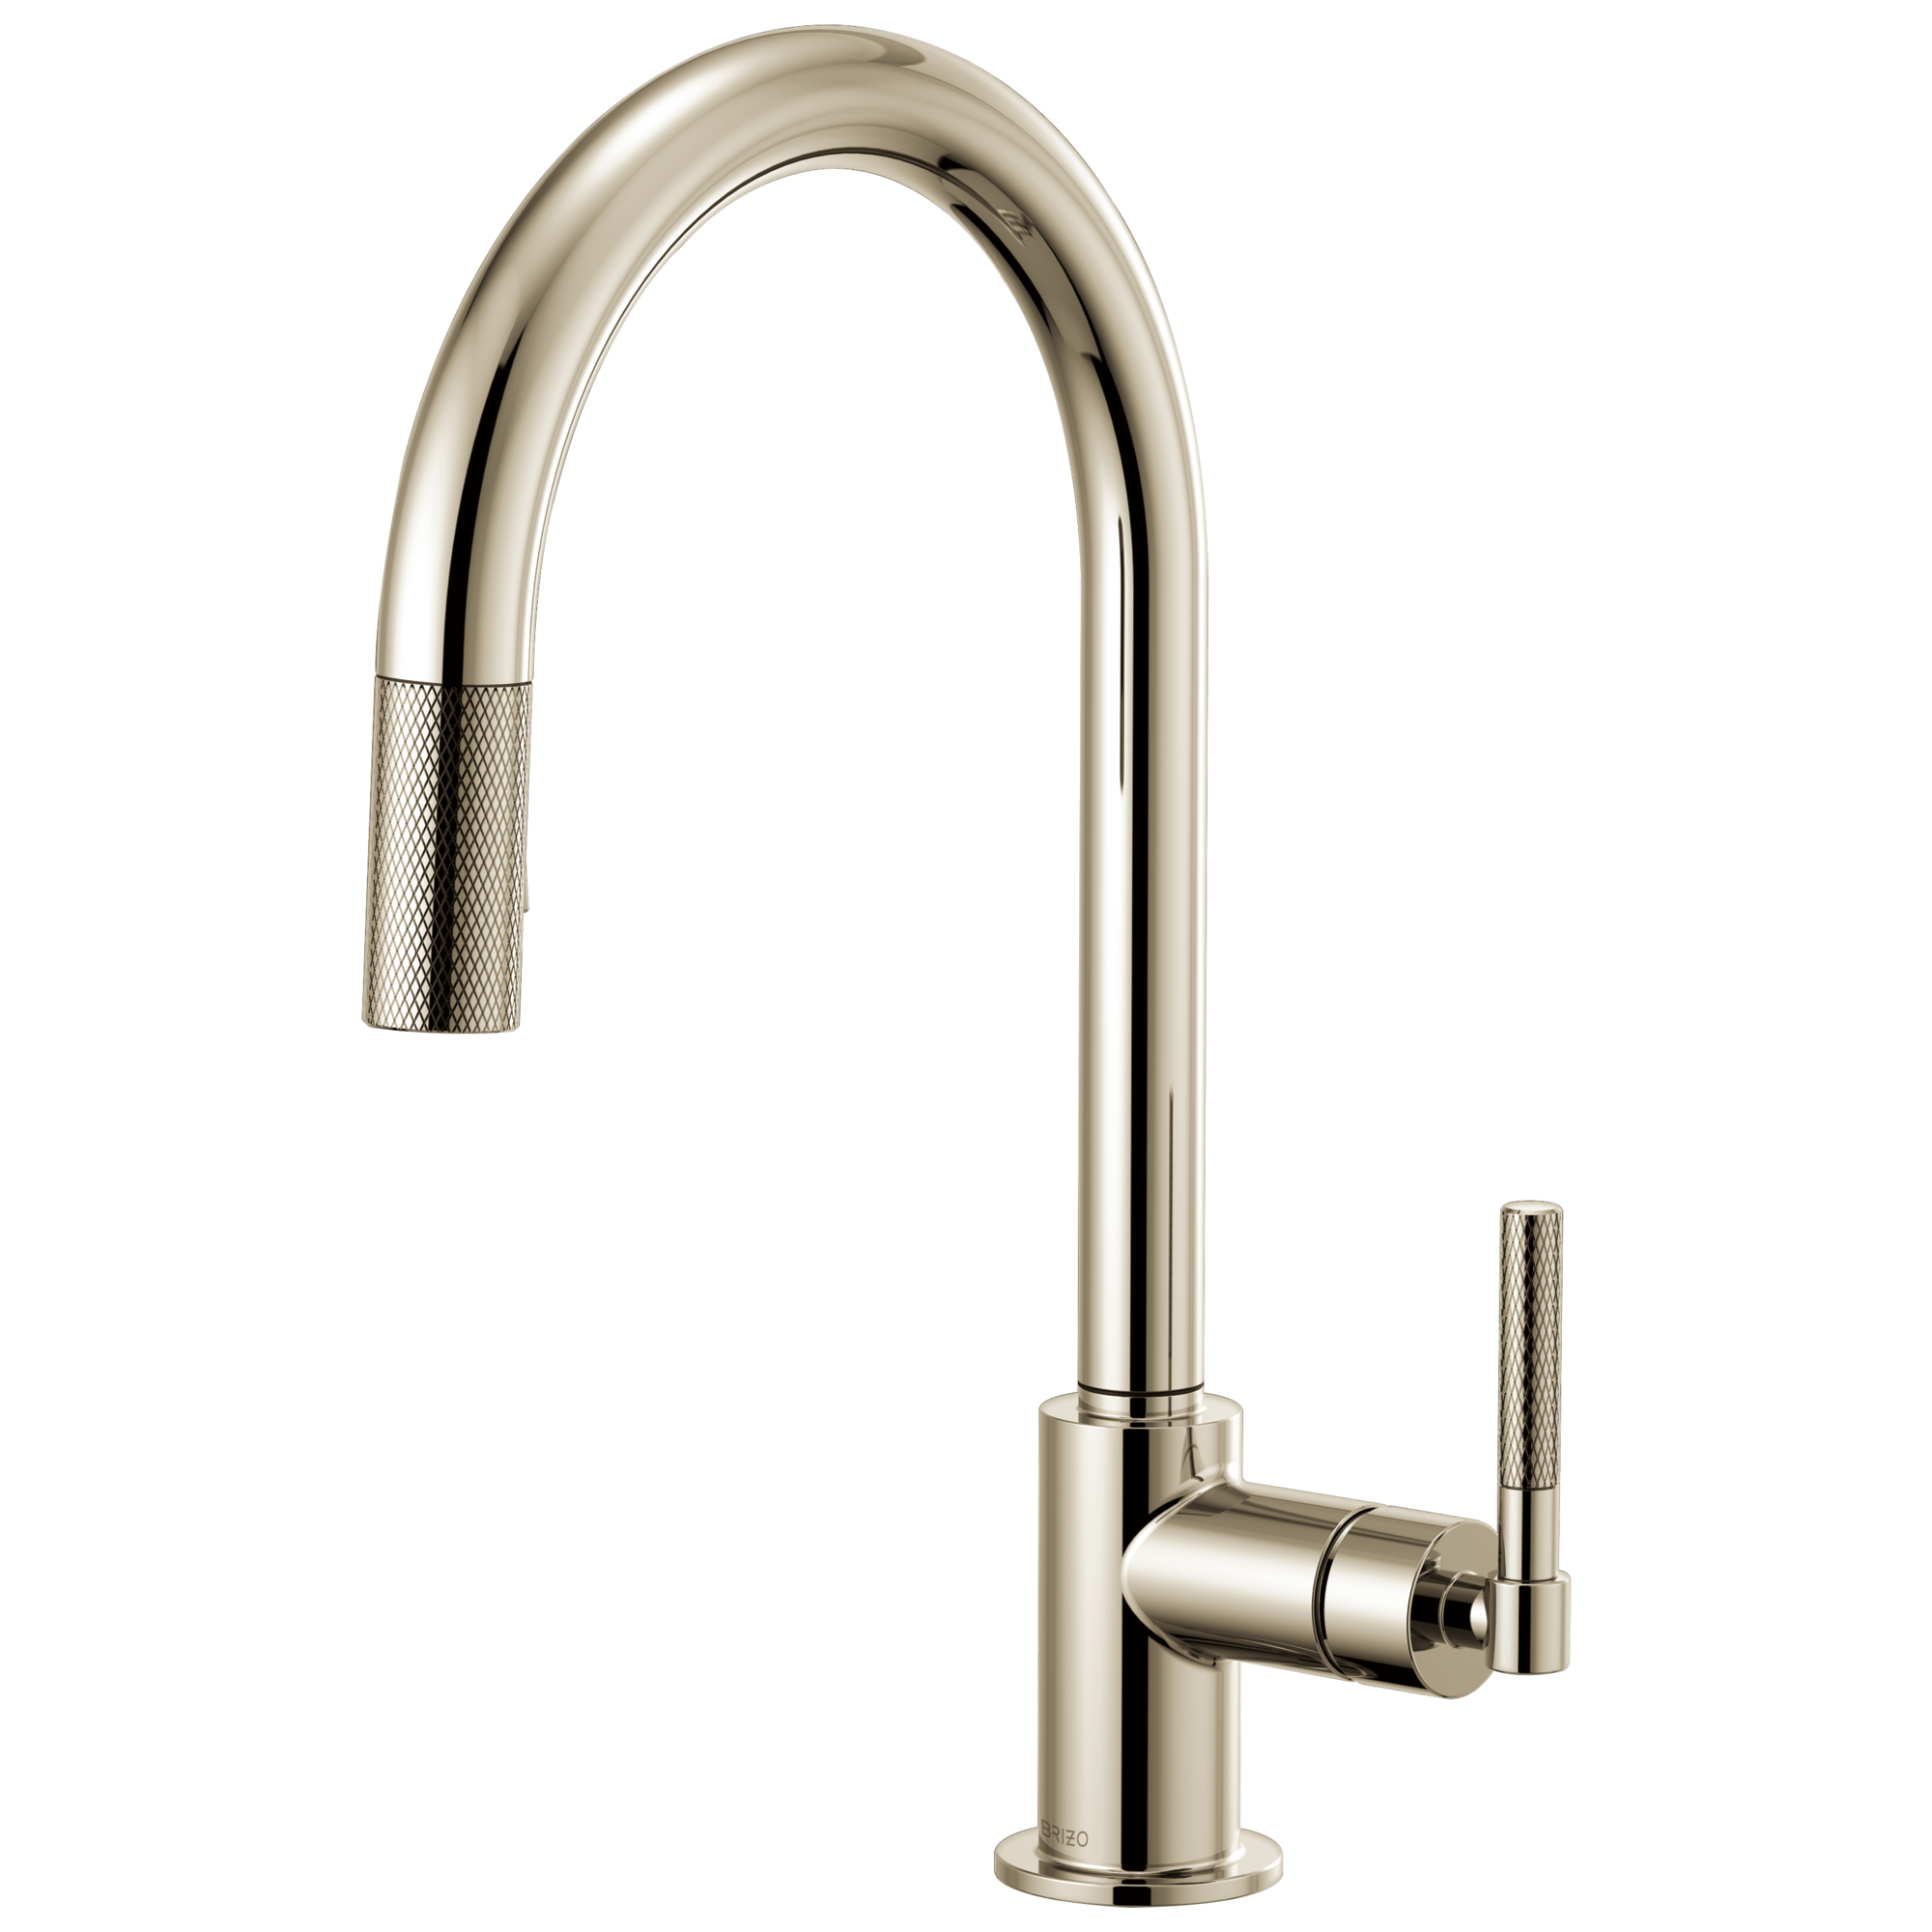 Brizo Litze Pull-Down Faucet with Arc Spout and Knurled Handle